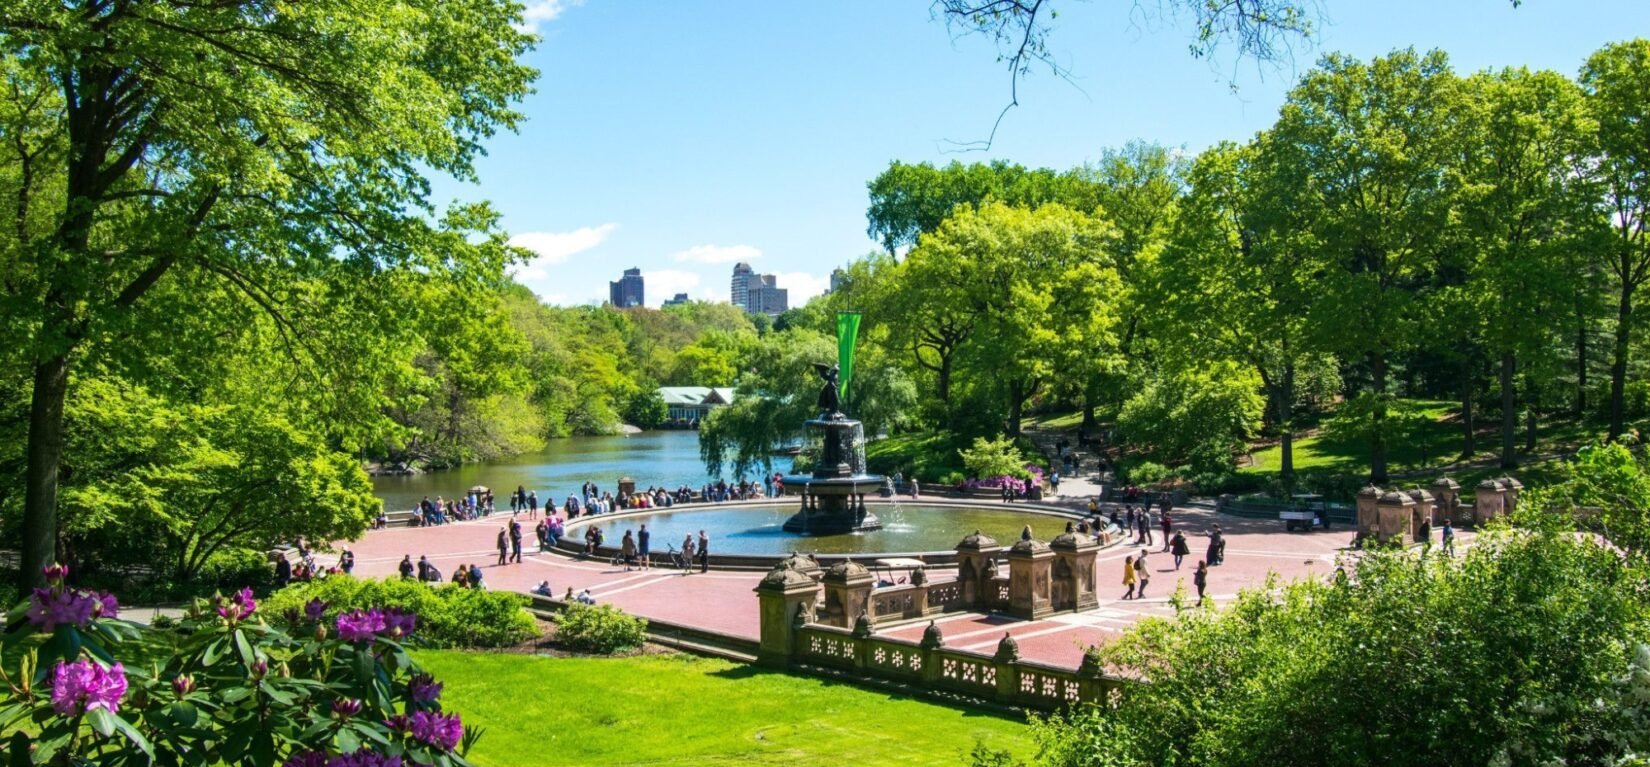 The Secrets of Central Park Walking Tour with Kevin Draper